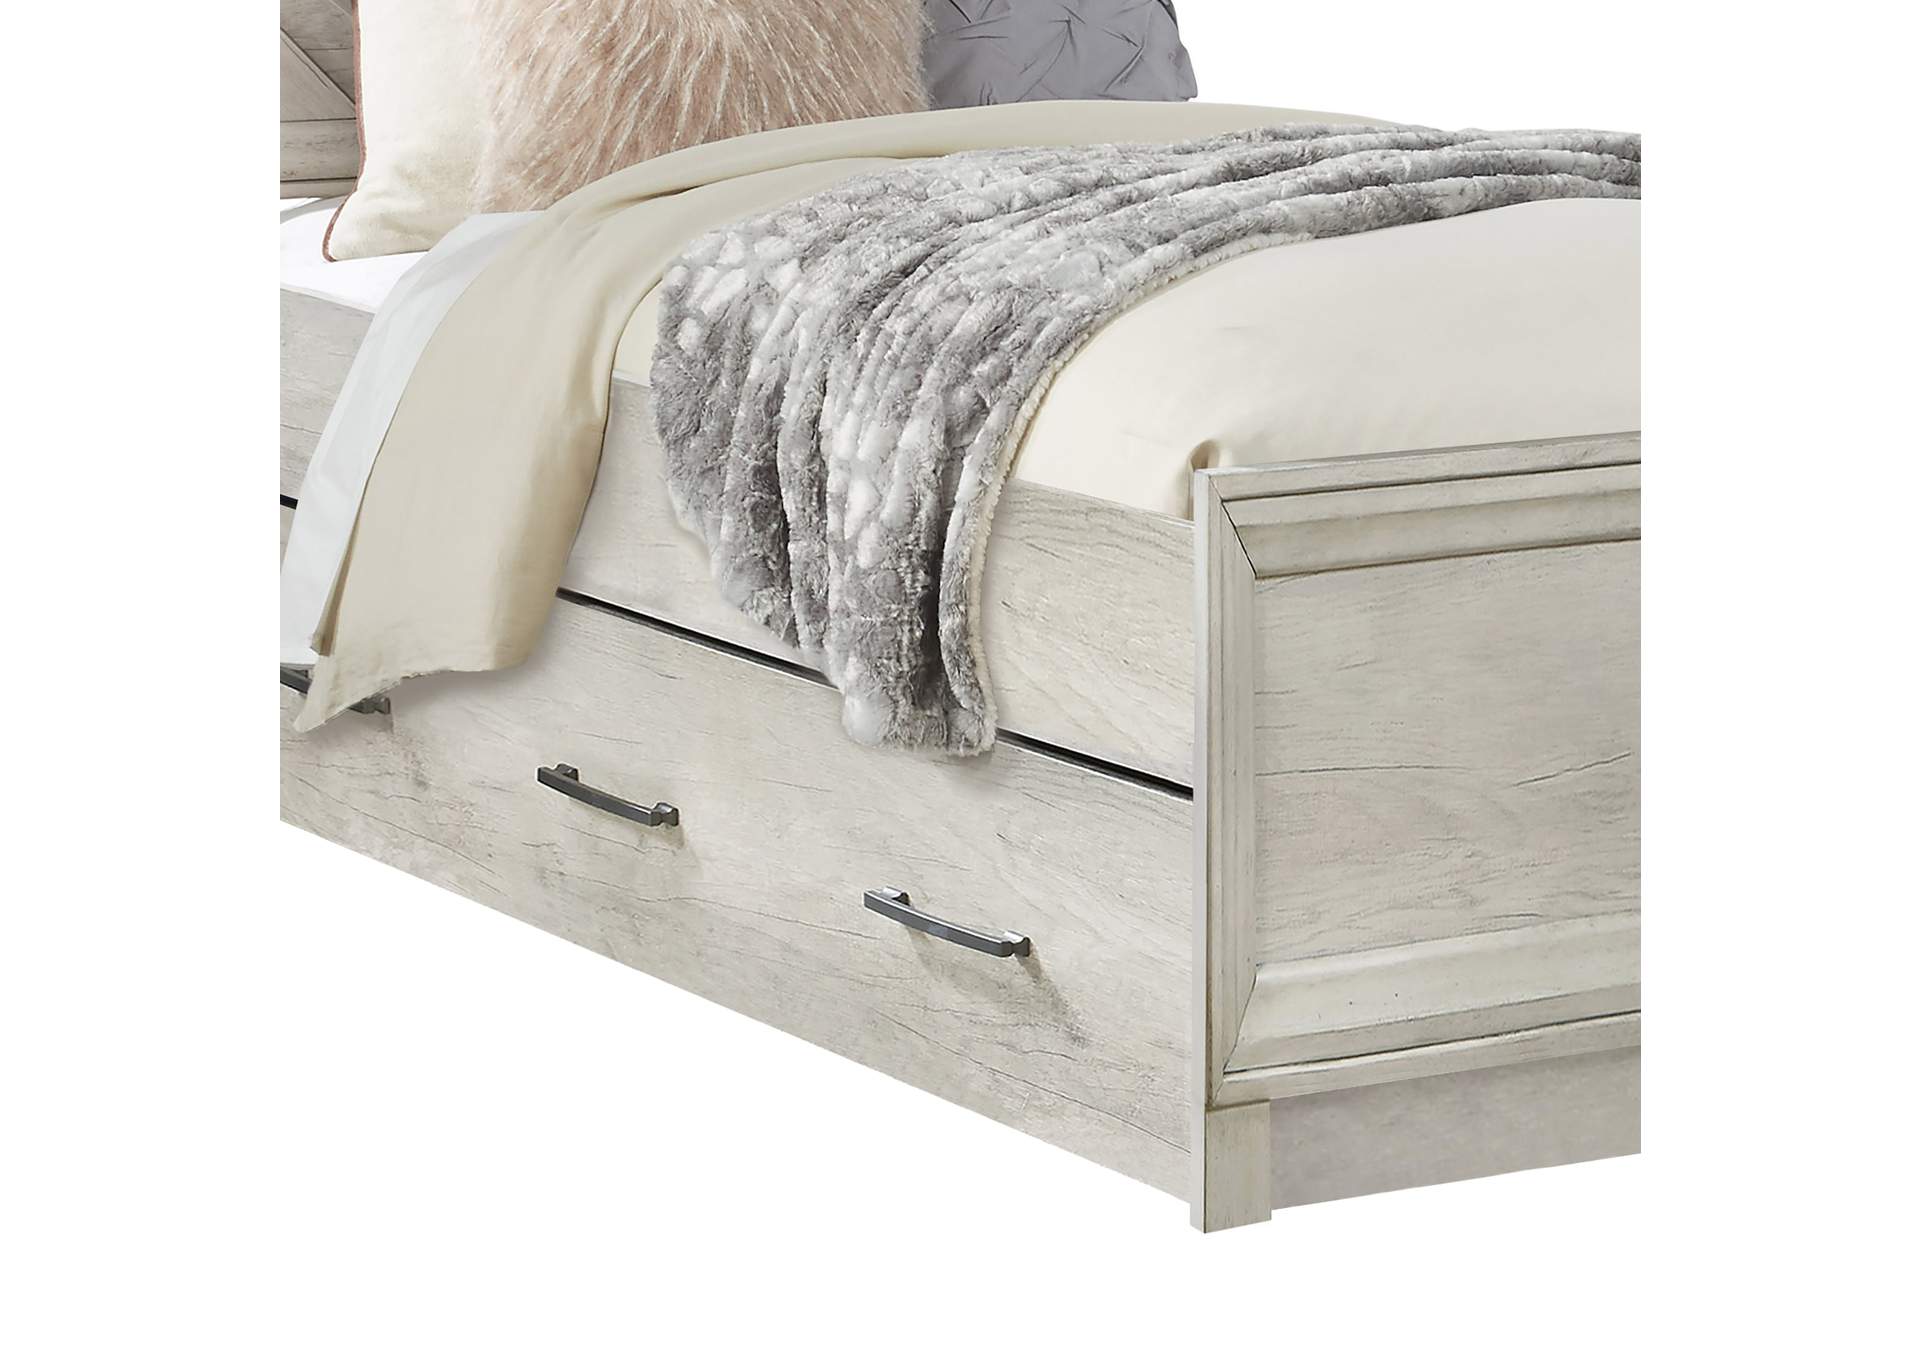 Riverwood Twin Panel Bed with Trundle,Pulaski Furniture